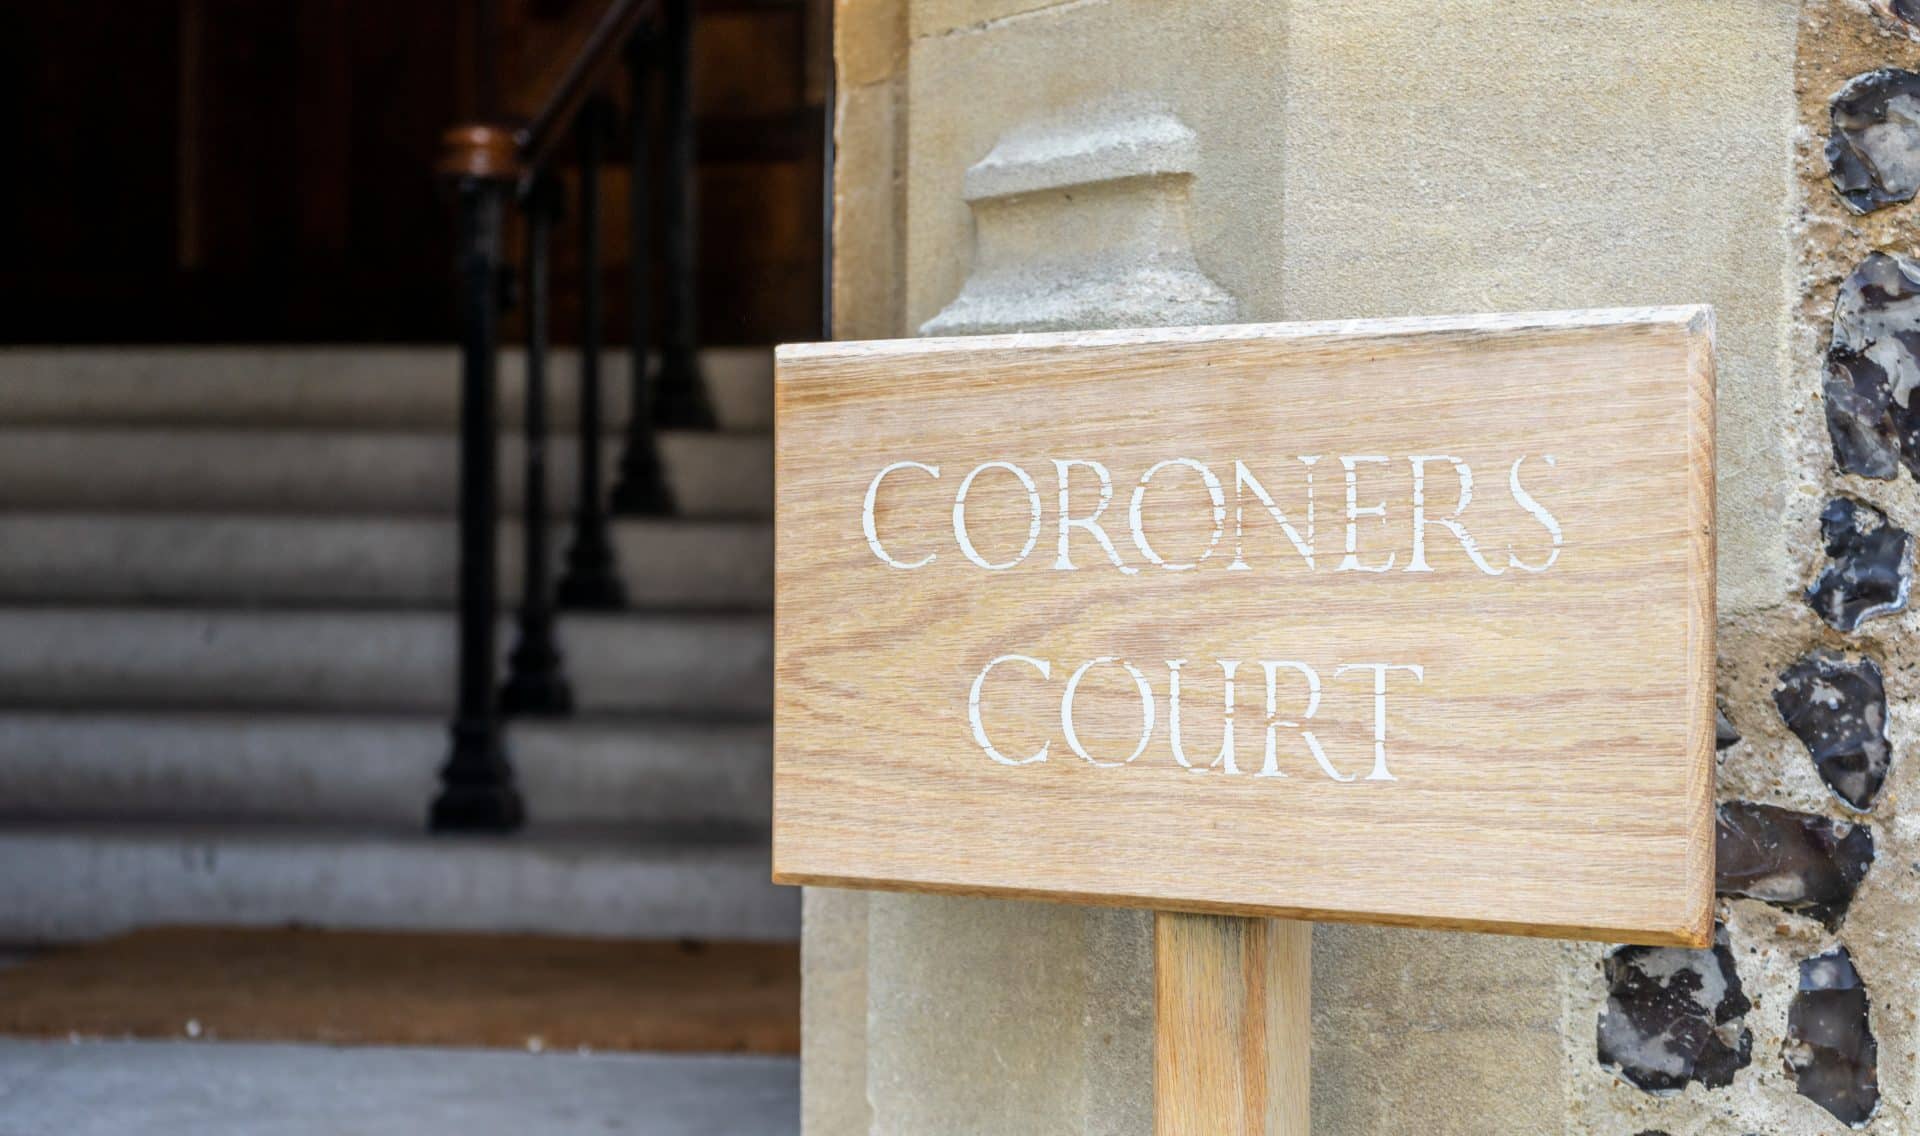 A Wooden Sign Showing The Words Coroners Office